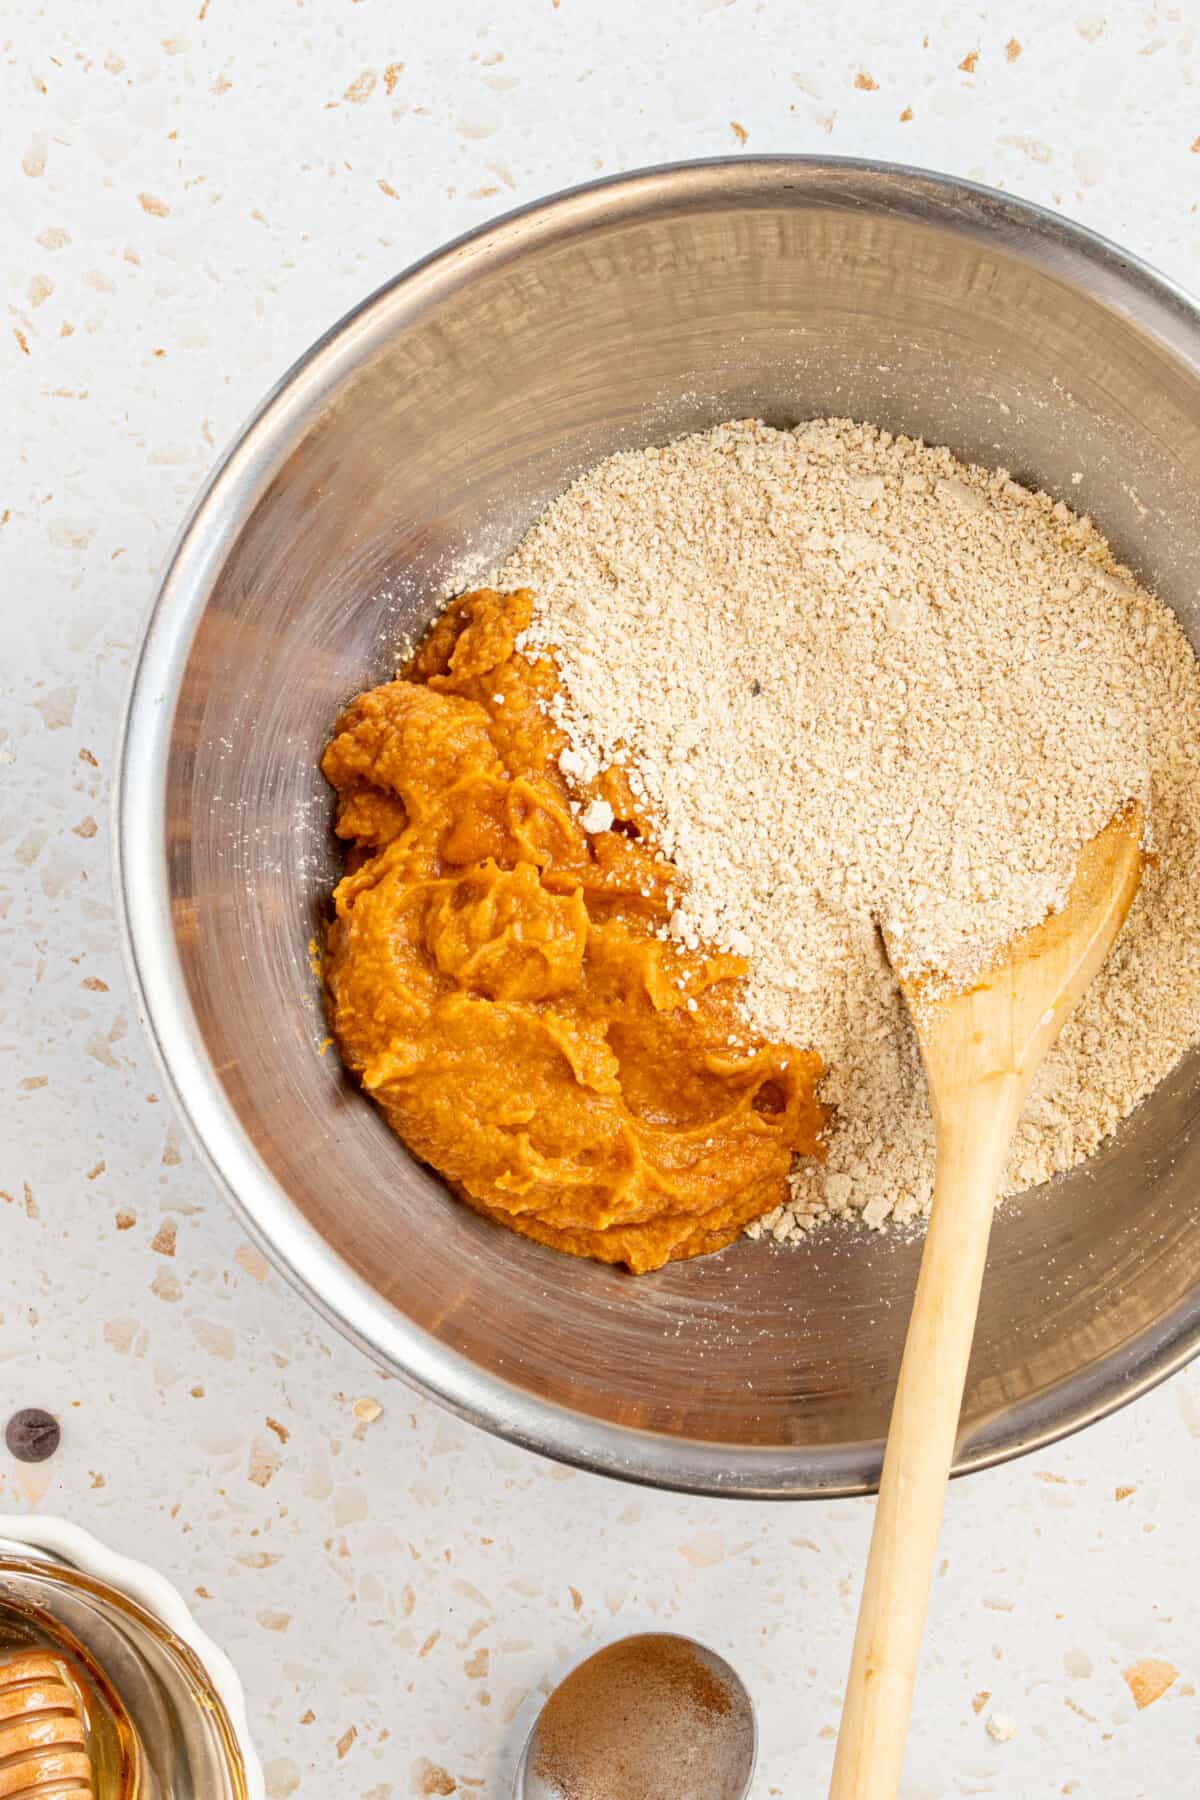 Processed oats and pumpkin ingredients in a mixing bowl.